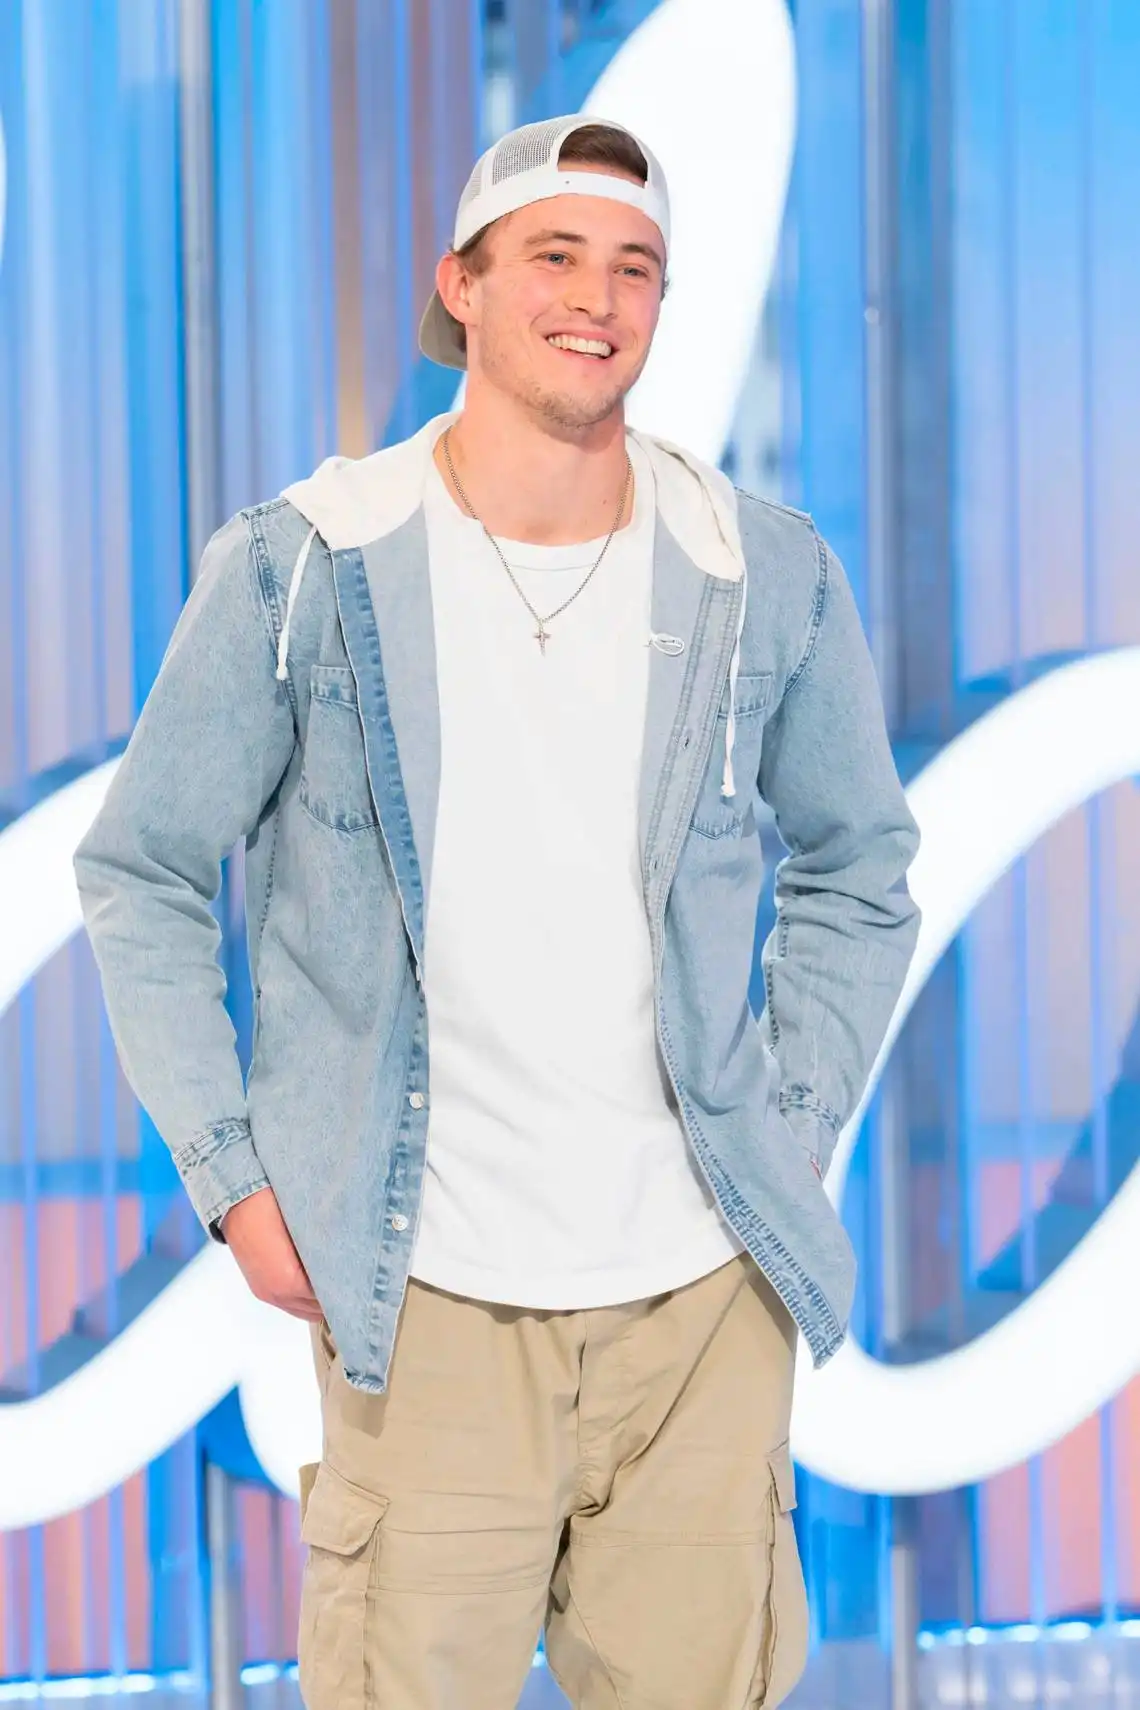 Charlotte native Blake Proehl auditions on American Idol: Did he make it to Hollywood?